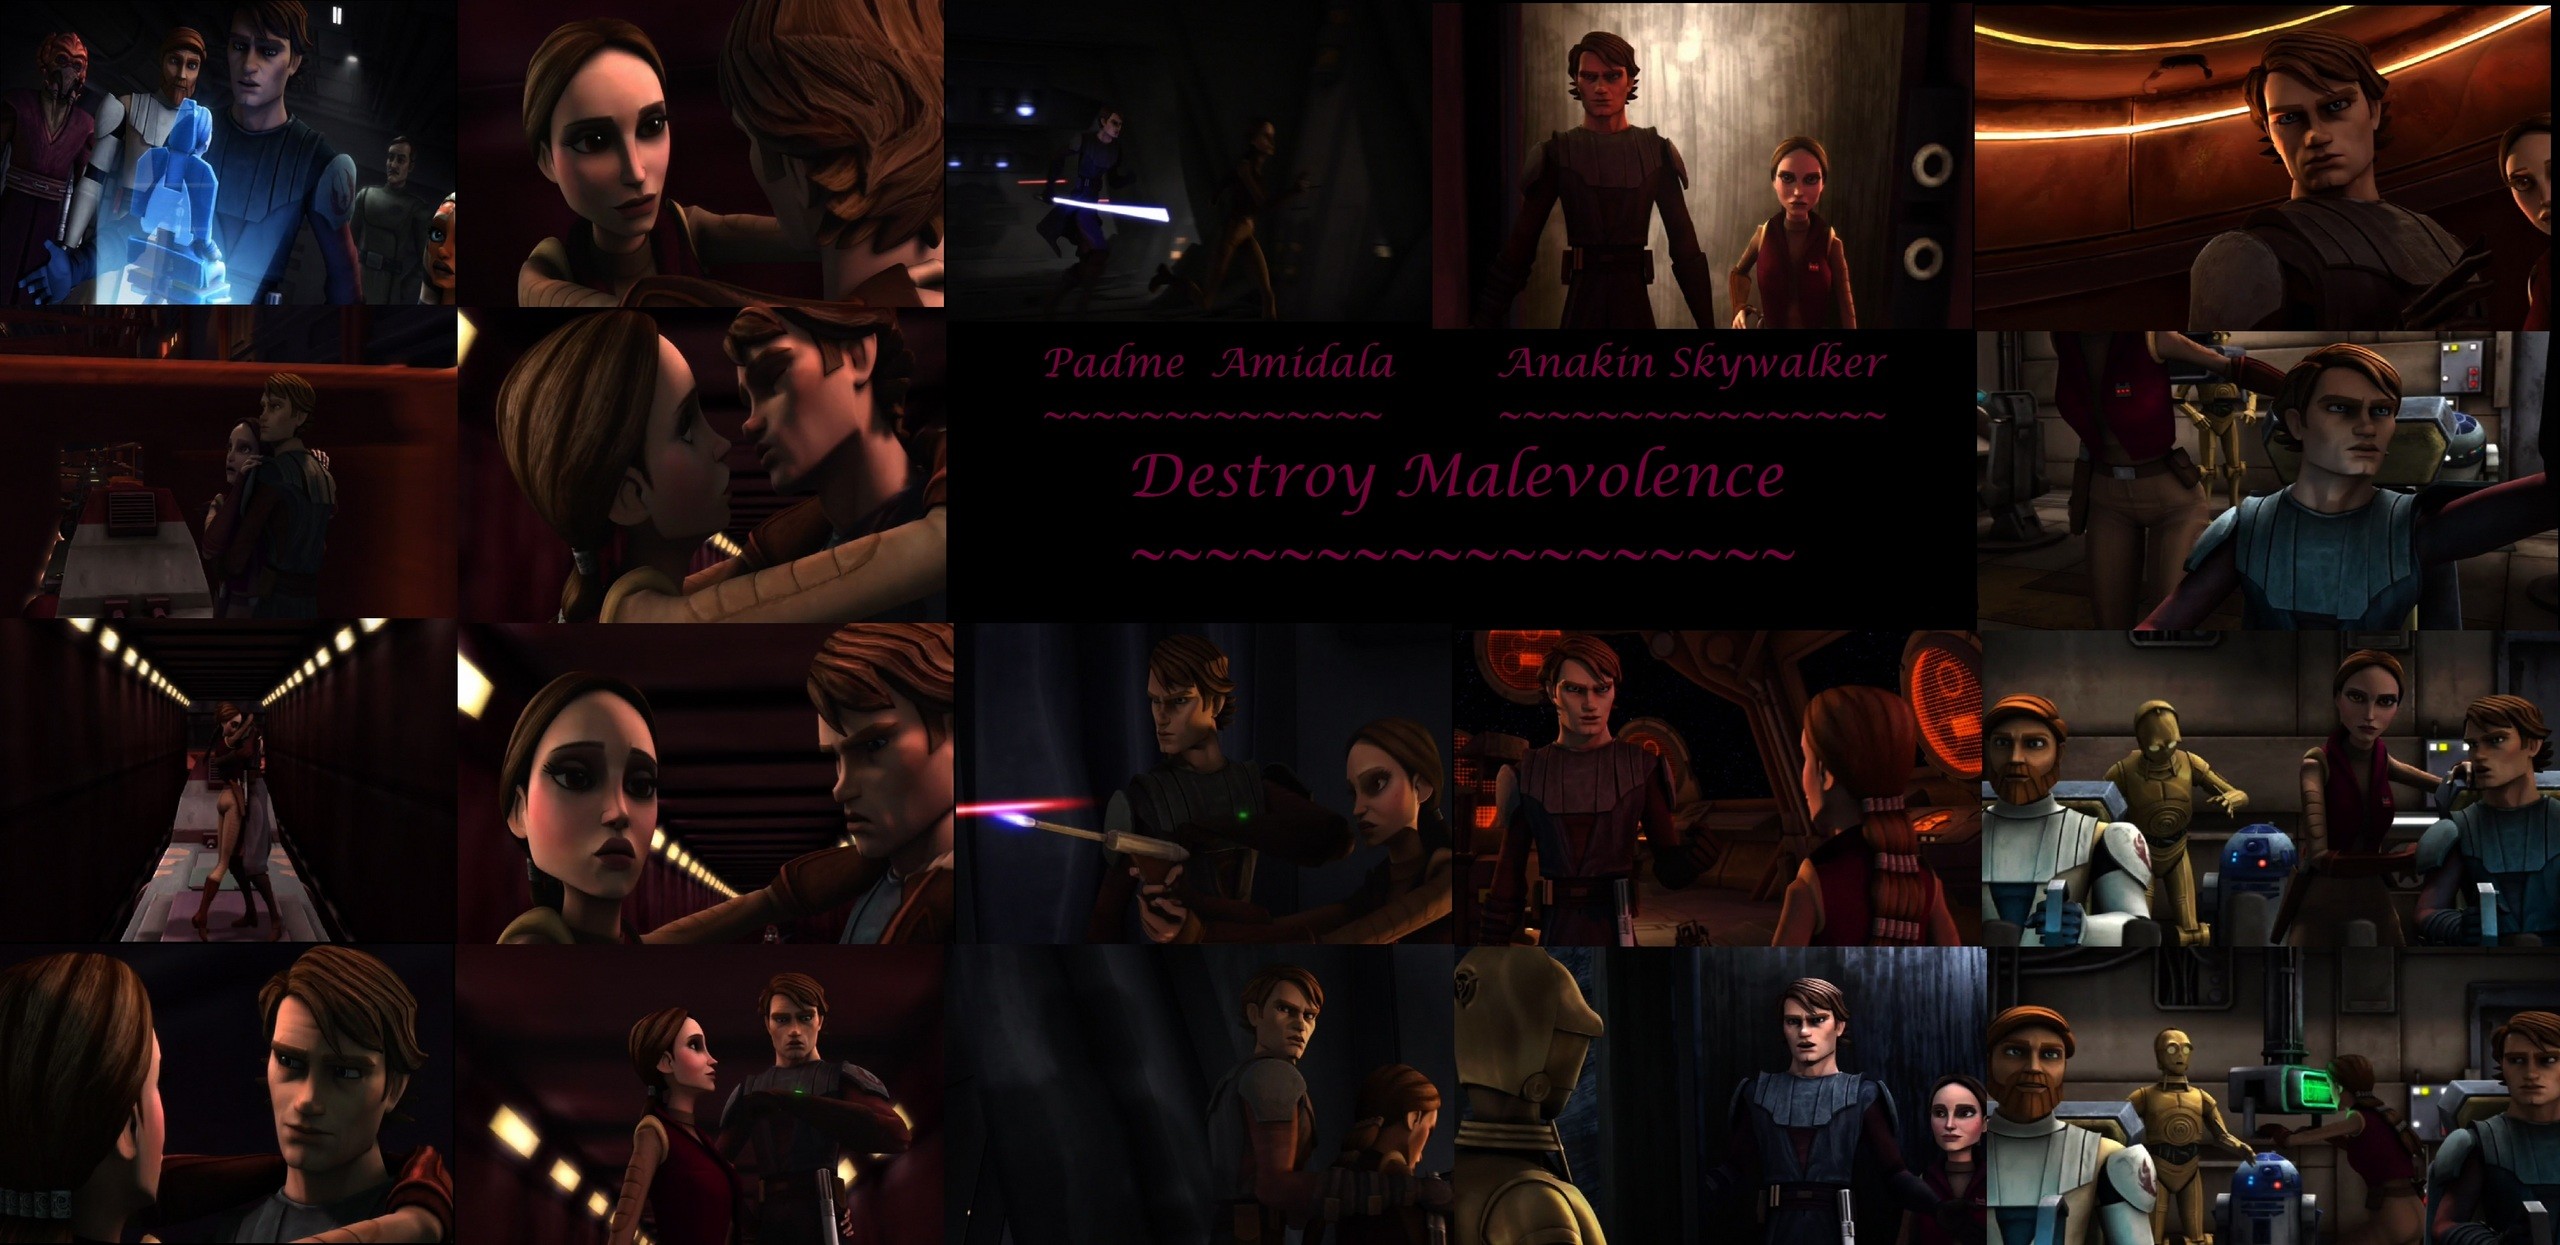 Clone Wars Anakin and PadmÃ © images Destroy Malevolence HD wallpaper and b...